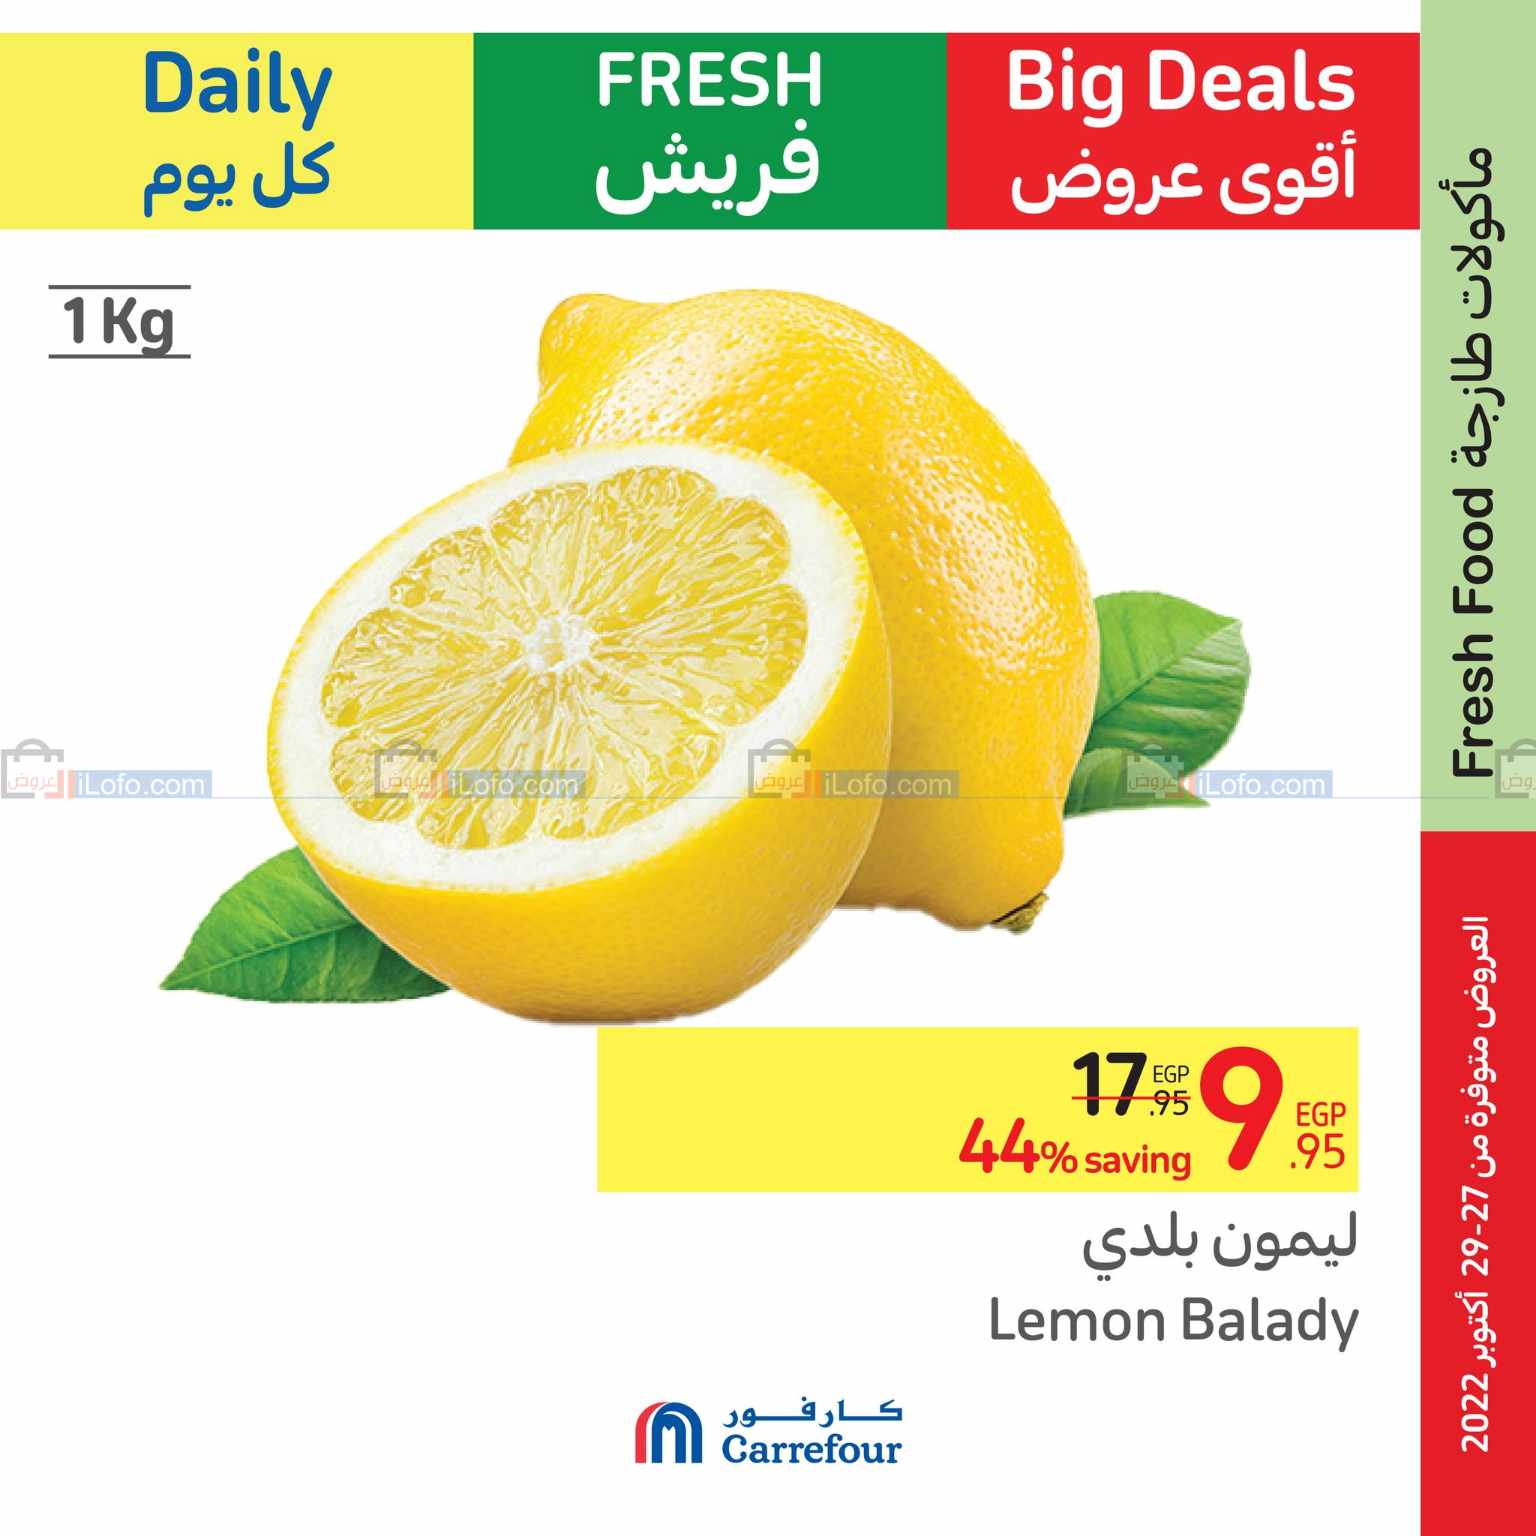 Page 4 at Fresh Deals at Carrefour Egypt 